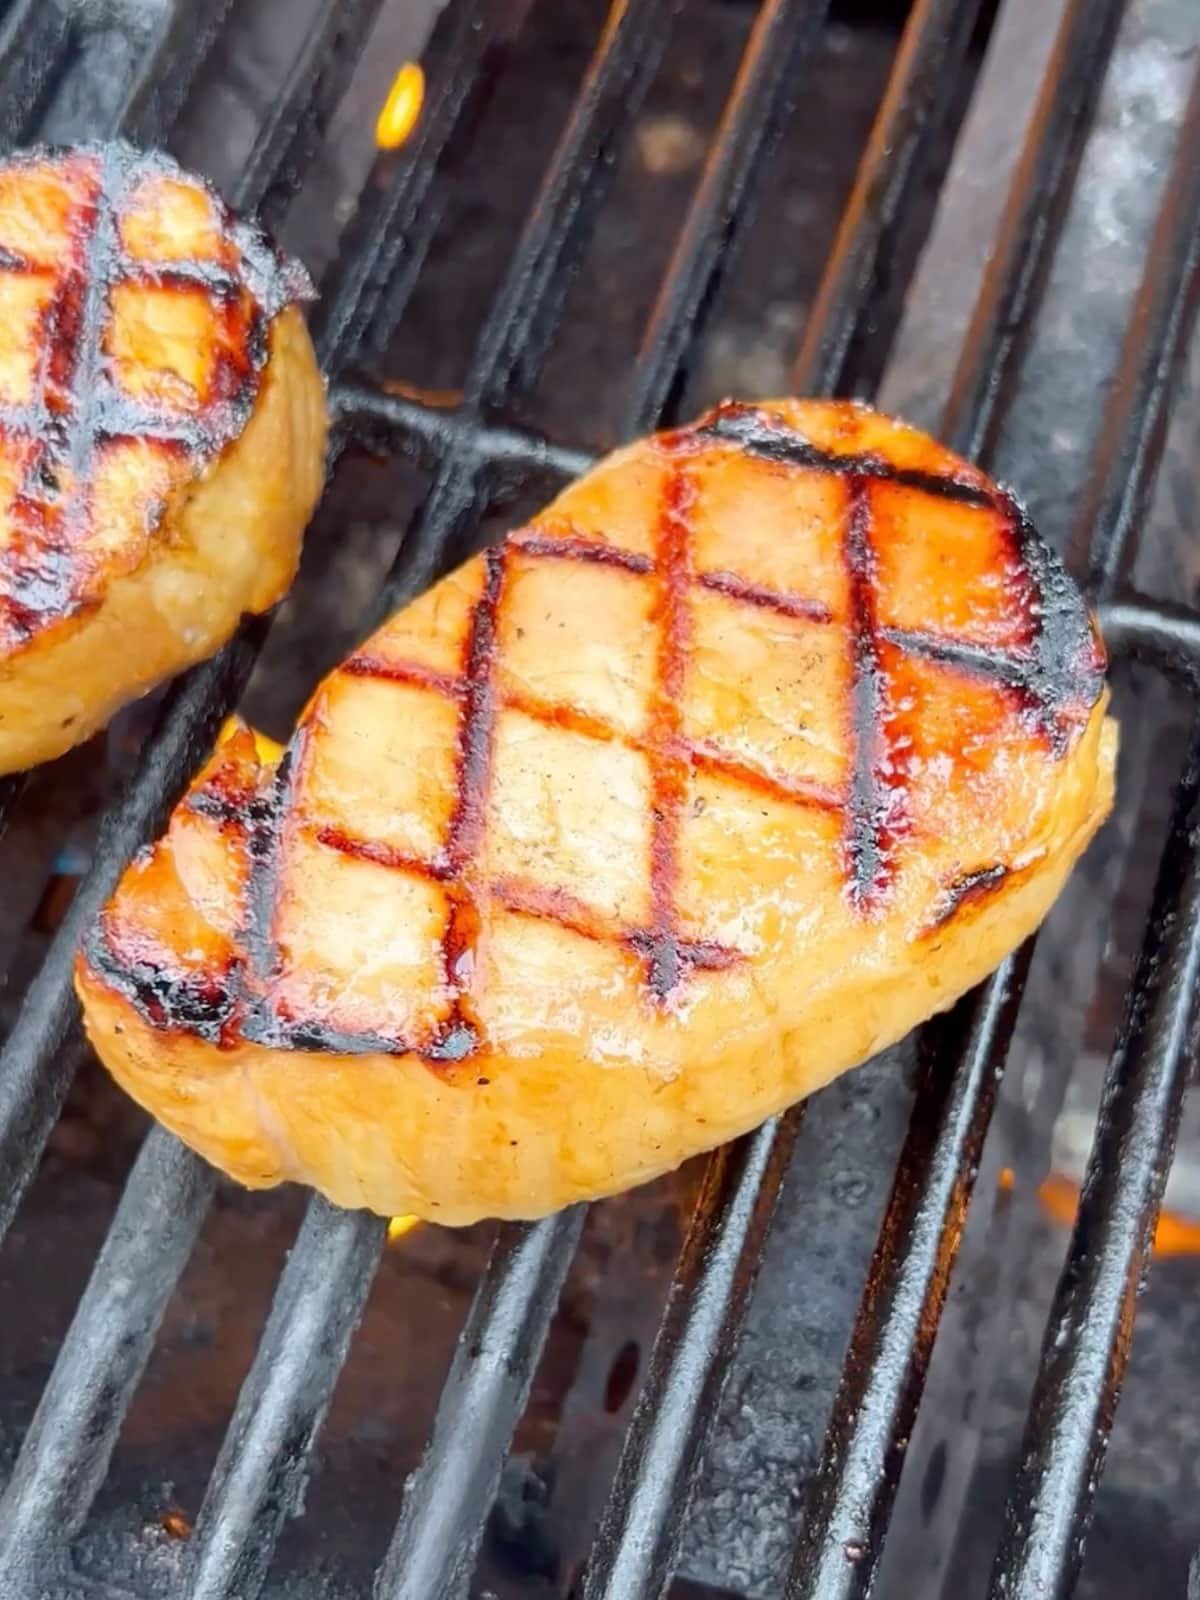 A pork chop cooking on the grill.